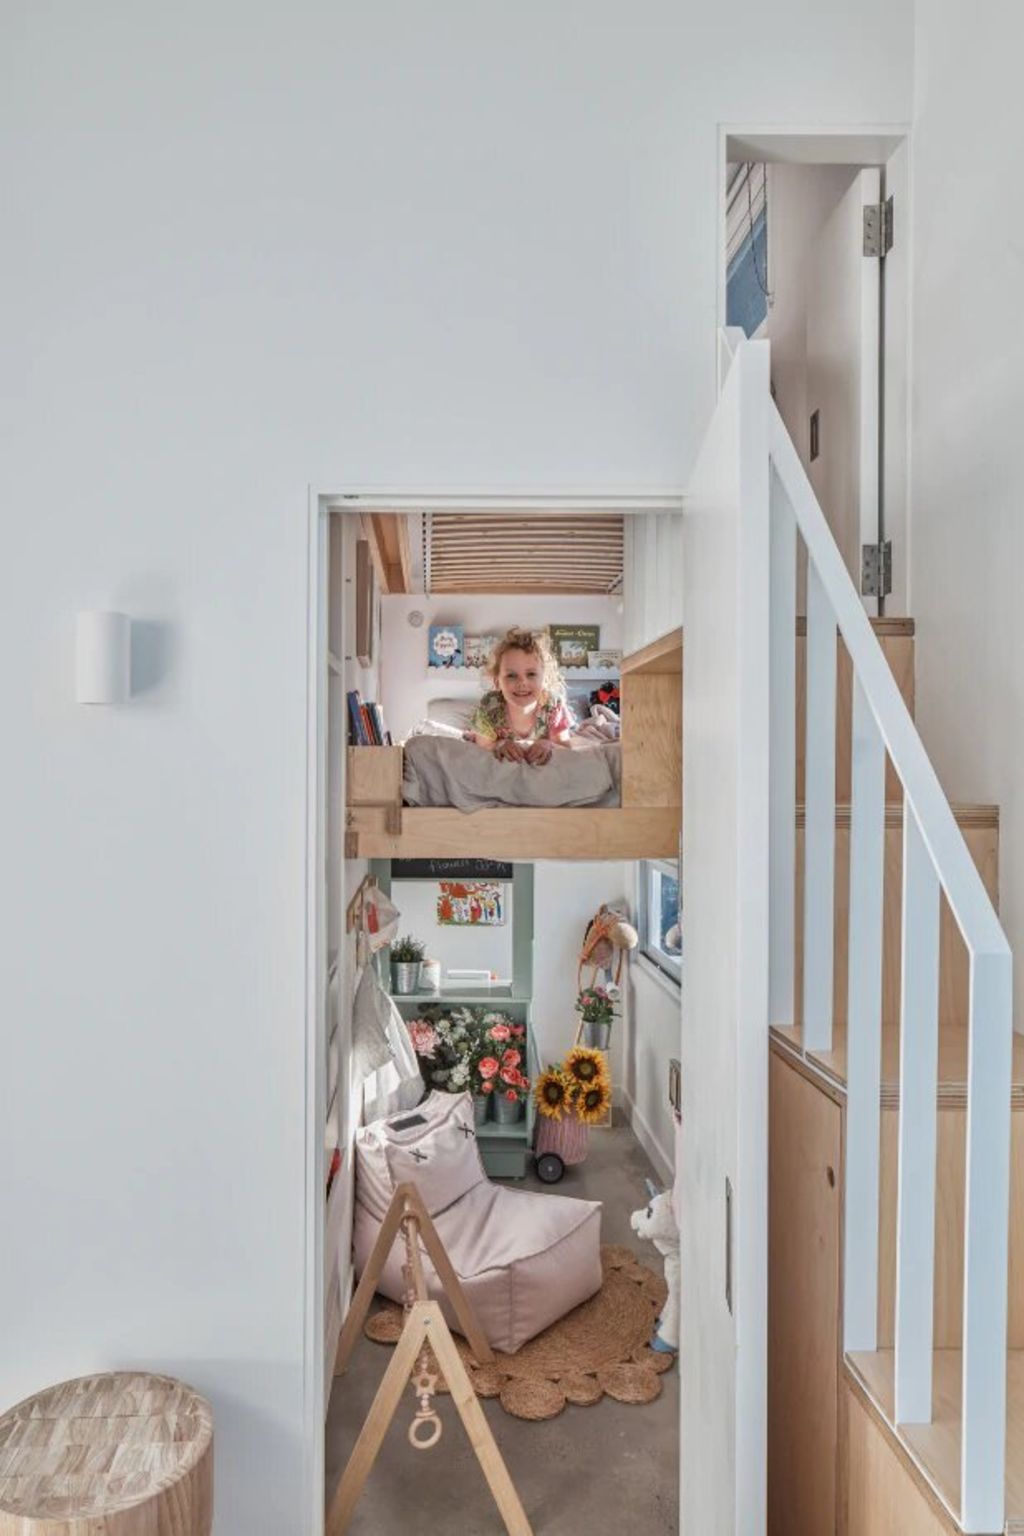 There is a small toy room beneath the beds. Photo: Andy MacPherson